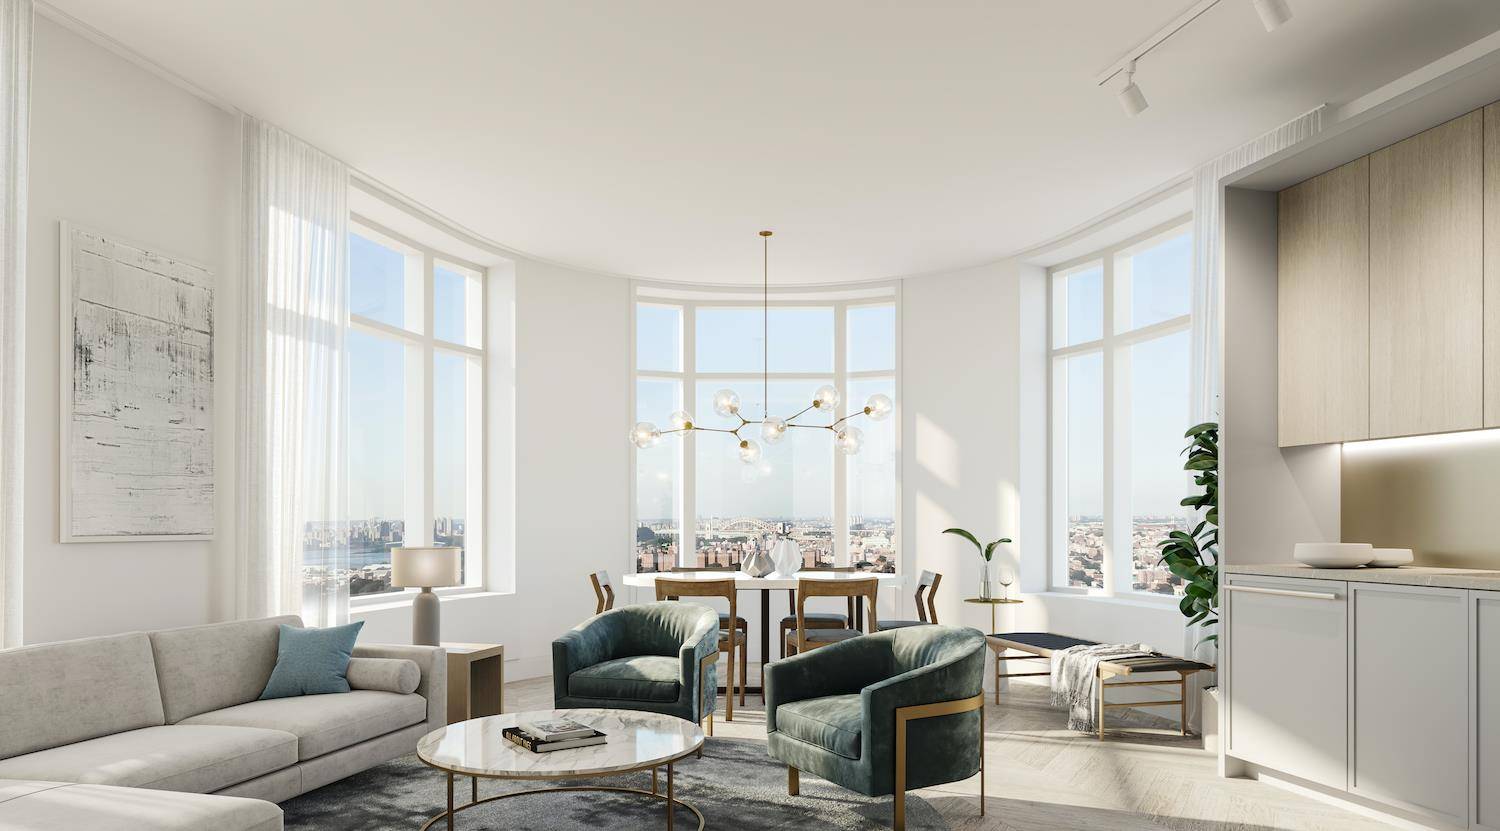 NOVALive Ahead of The CurveSoaring over park studded Long Island City rises NOVA, a collection of 86 new condominium residences uniquely formed by a remarkable terracotta facade that embodies the ...